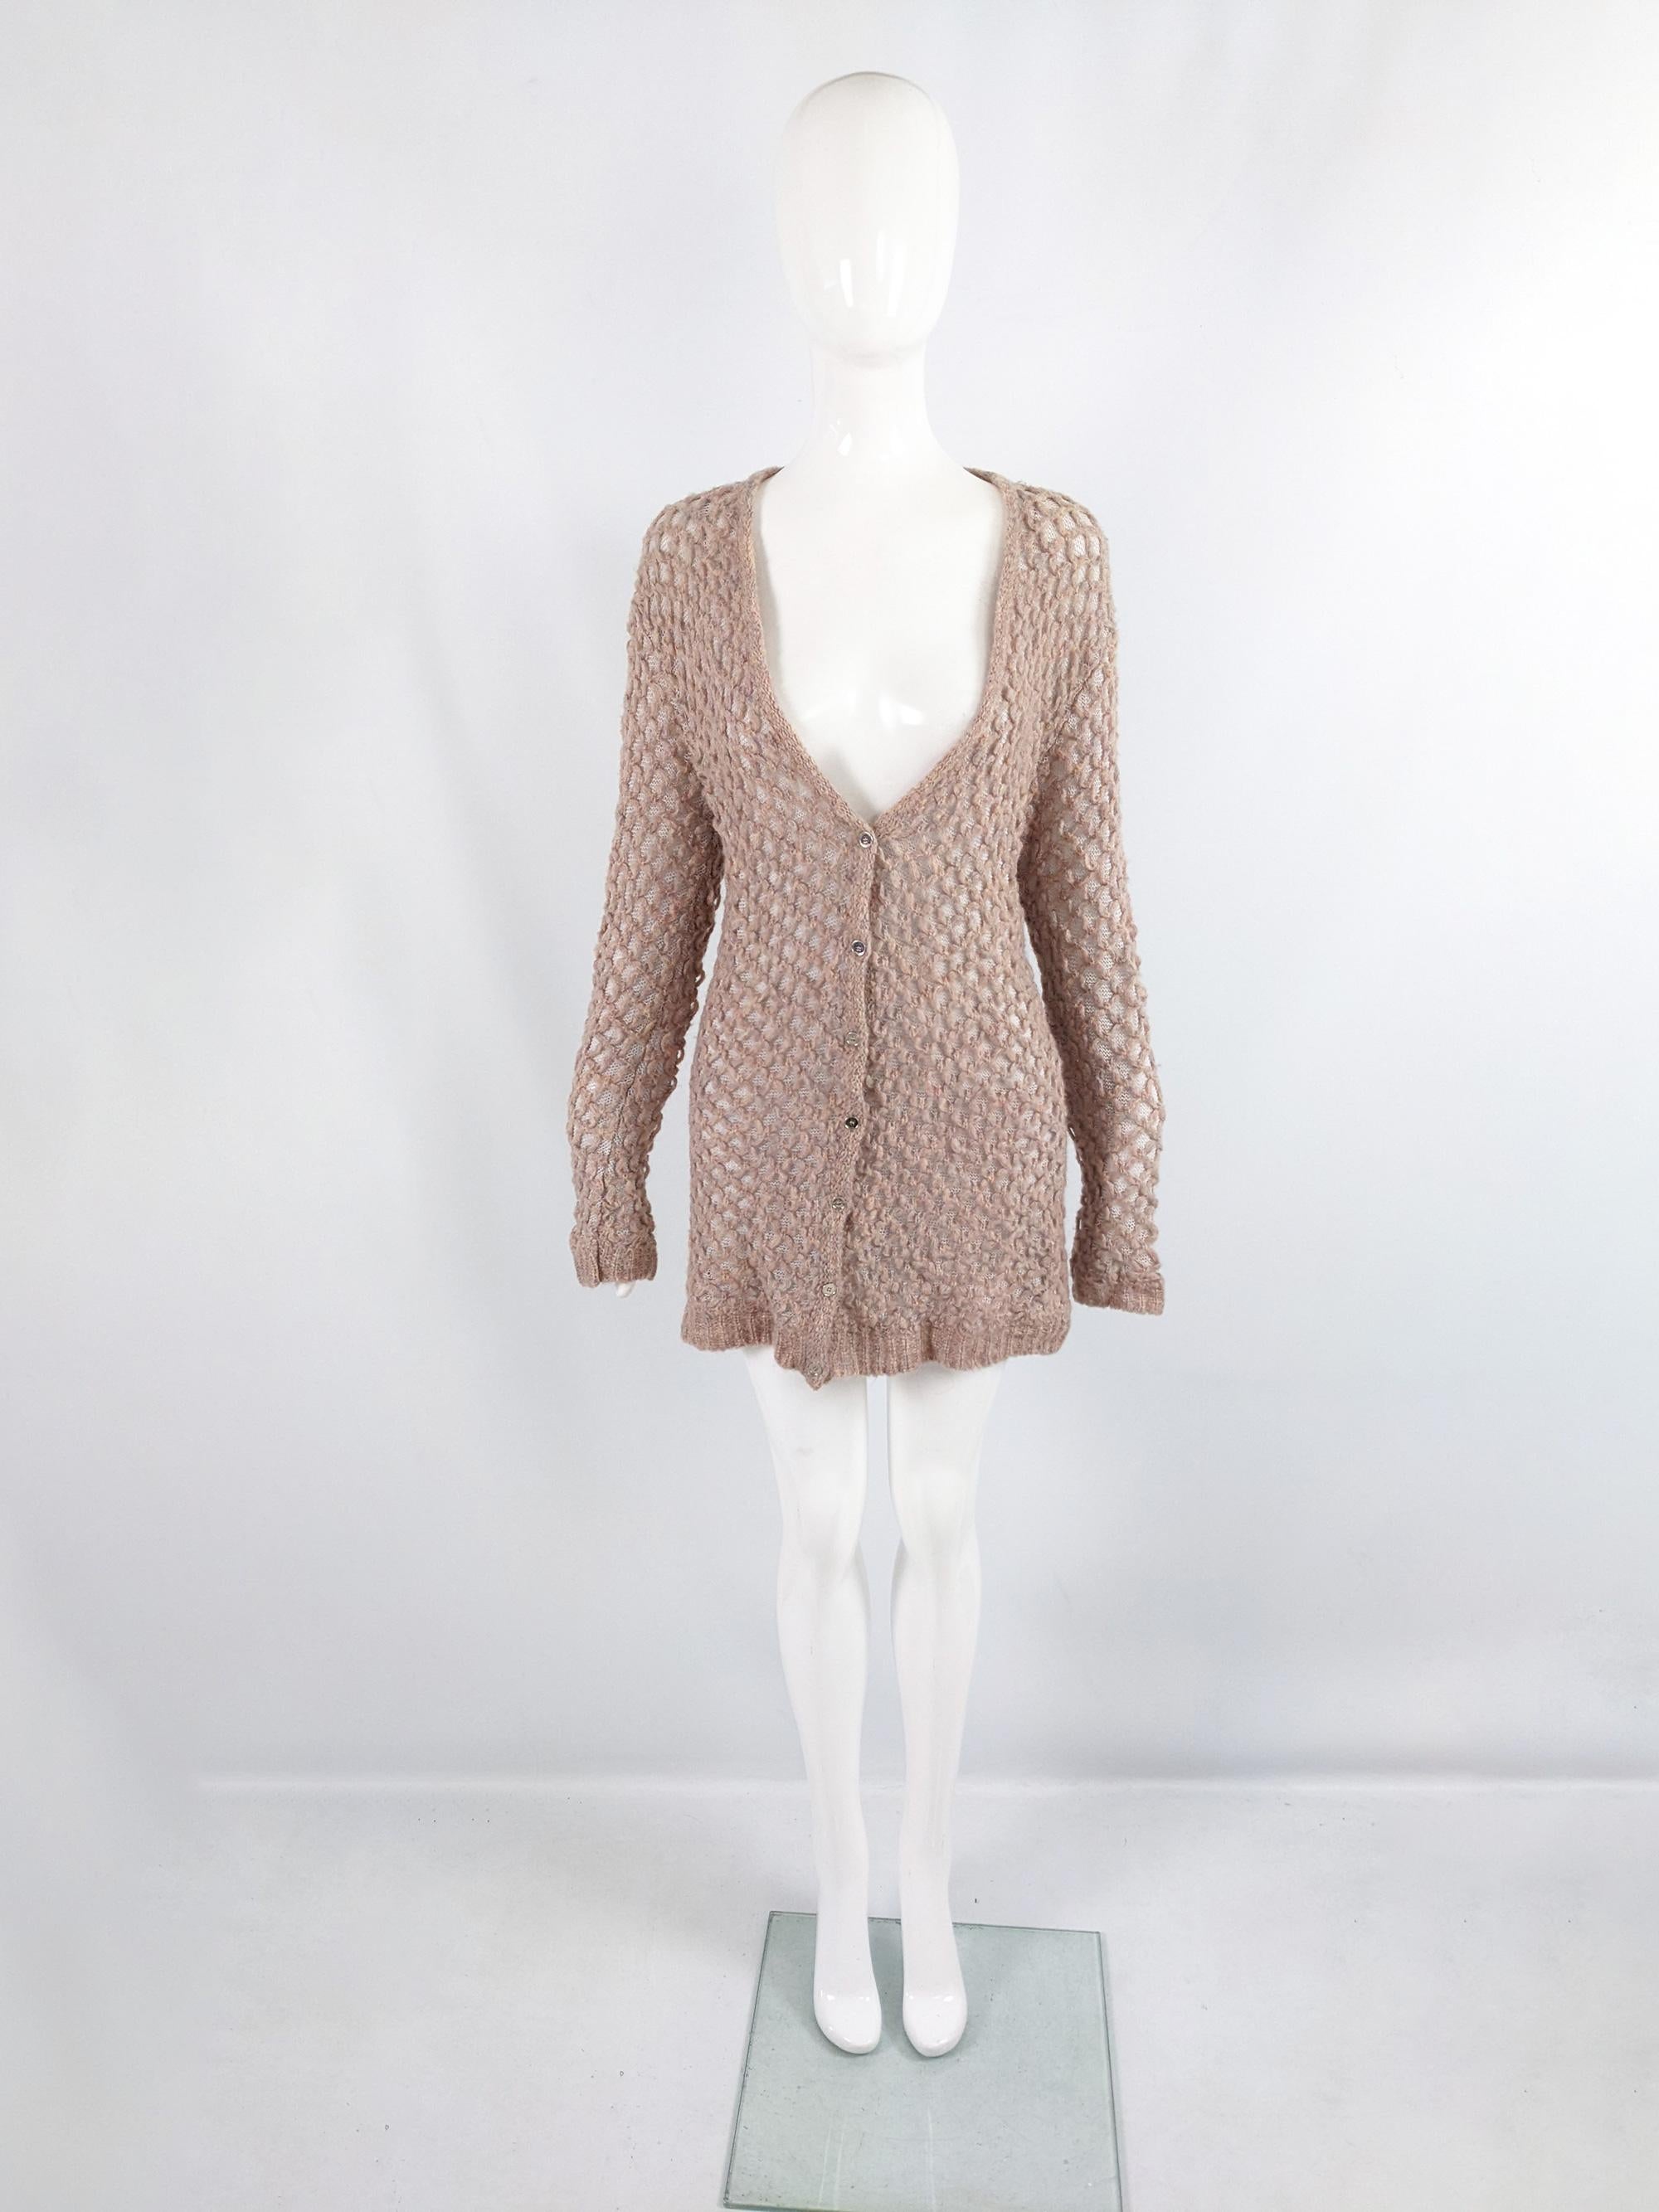 A beautiful vintage womens cardigan from the early 2000s by luxury fashion house, Escada. In a pastel pink soft, fuzzy knit with multicolored flecks throughout and a lattice design overlaid on a sheer knit lining. It has a longer length and 'Escada'